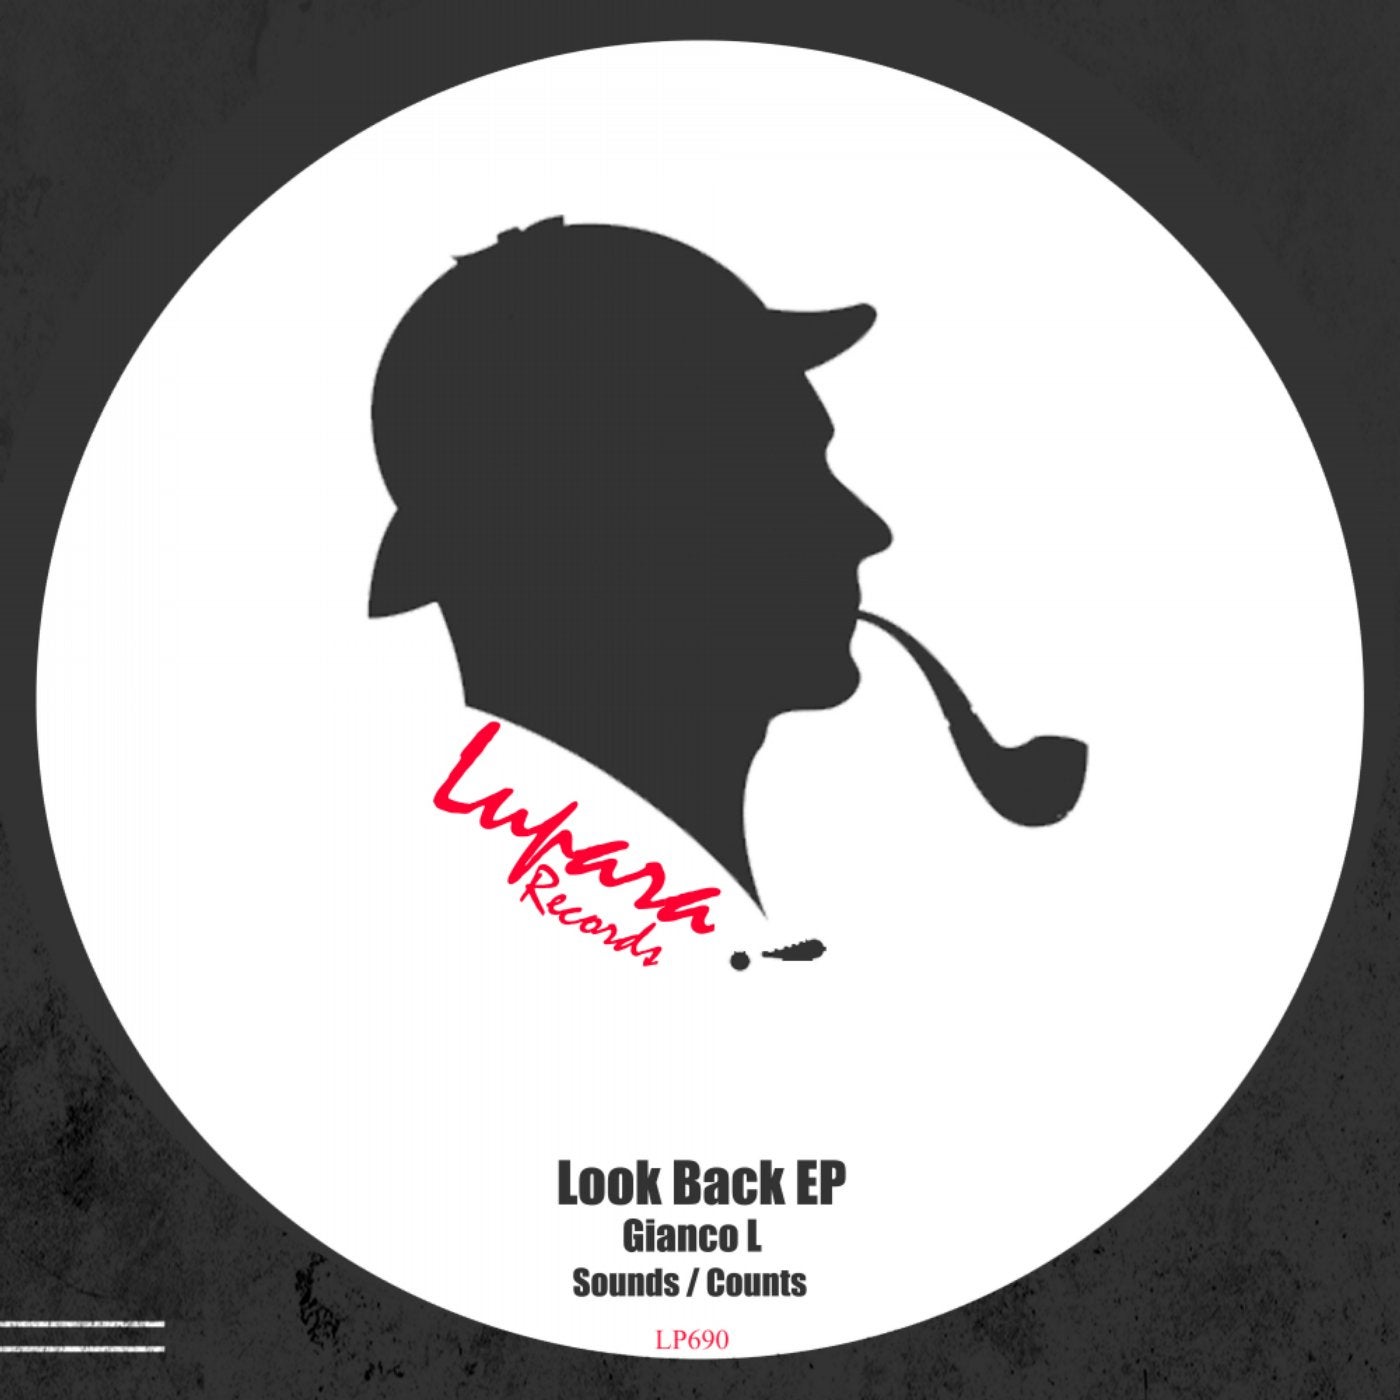 Look Back EP